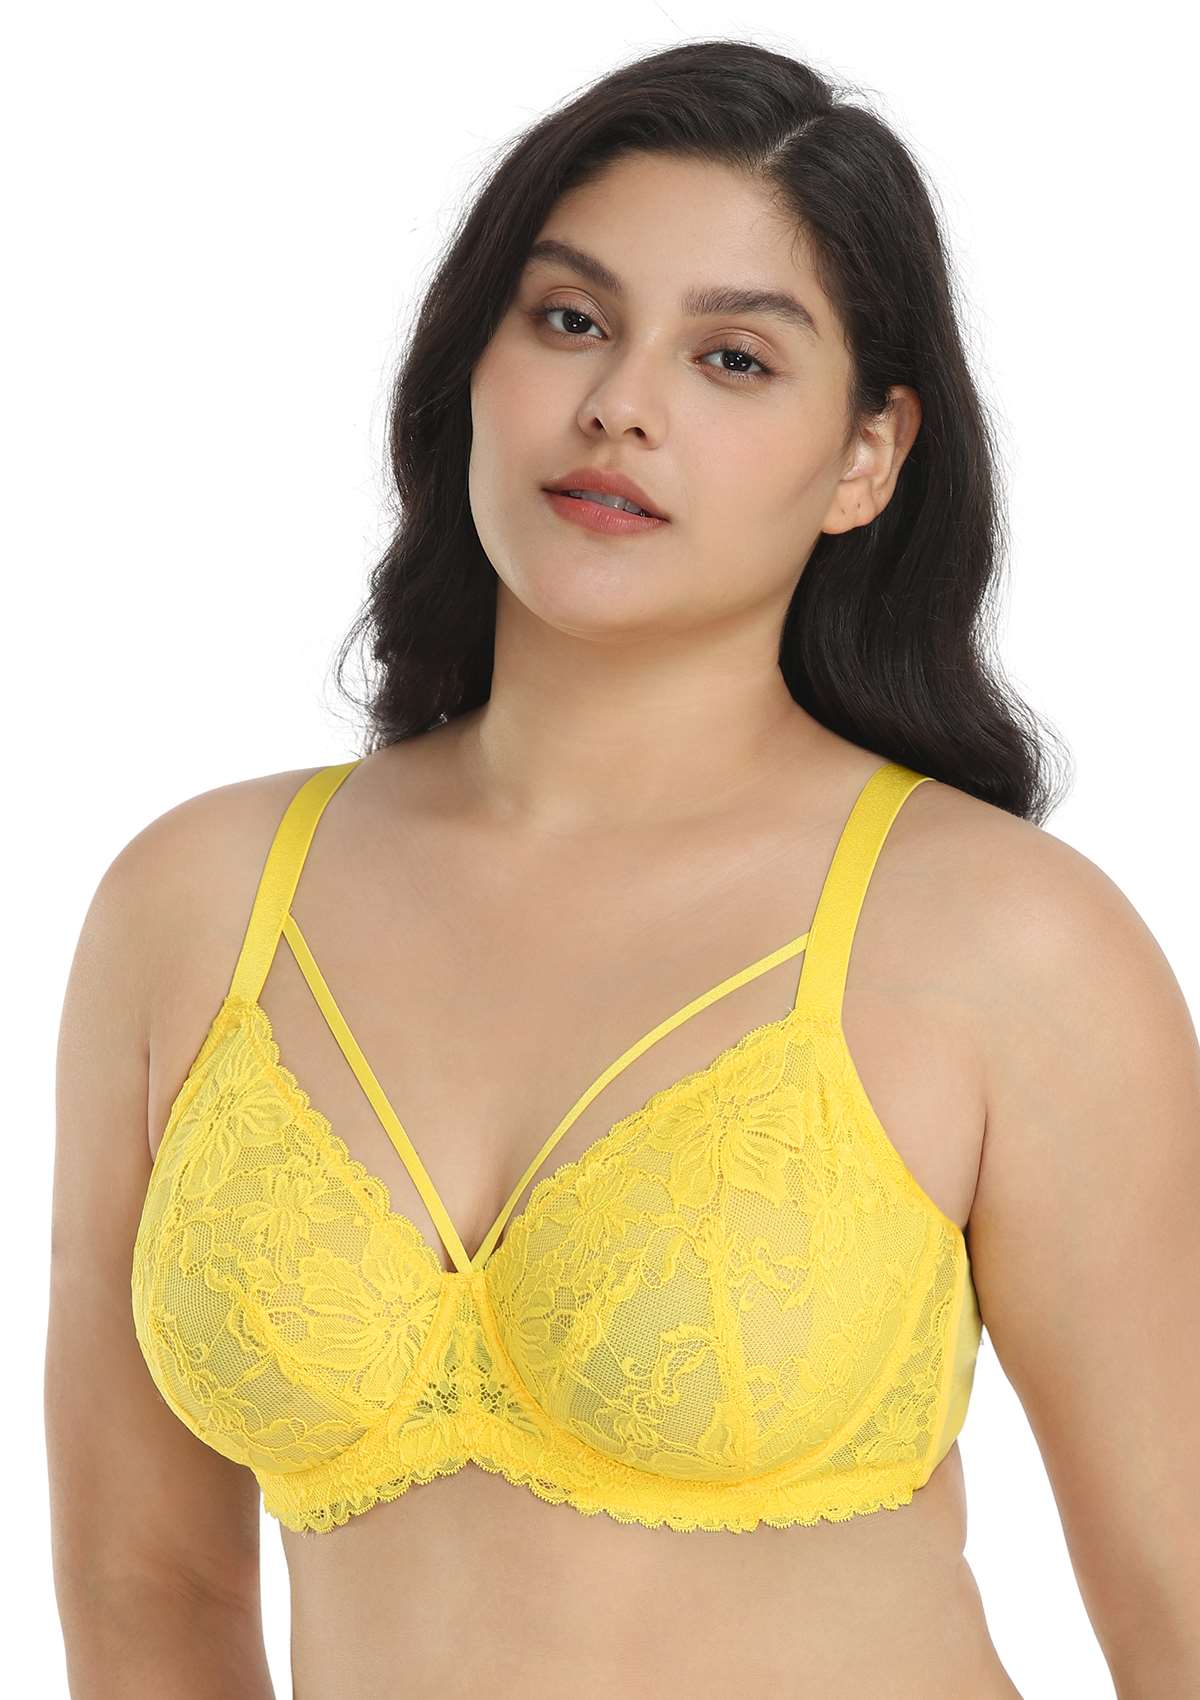 HSIA Unlined Lace Mesh Minimizer Bra For Large Breasts, Full Coverage - Bright Yellow / 36 / D